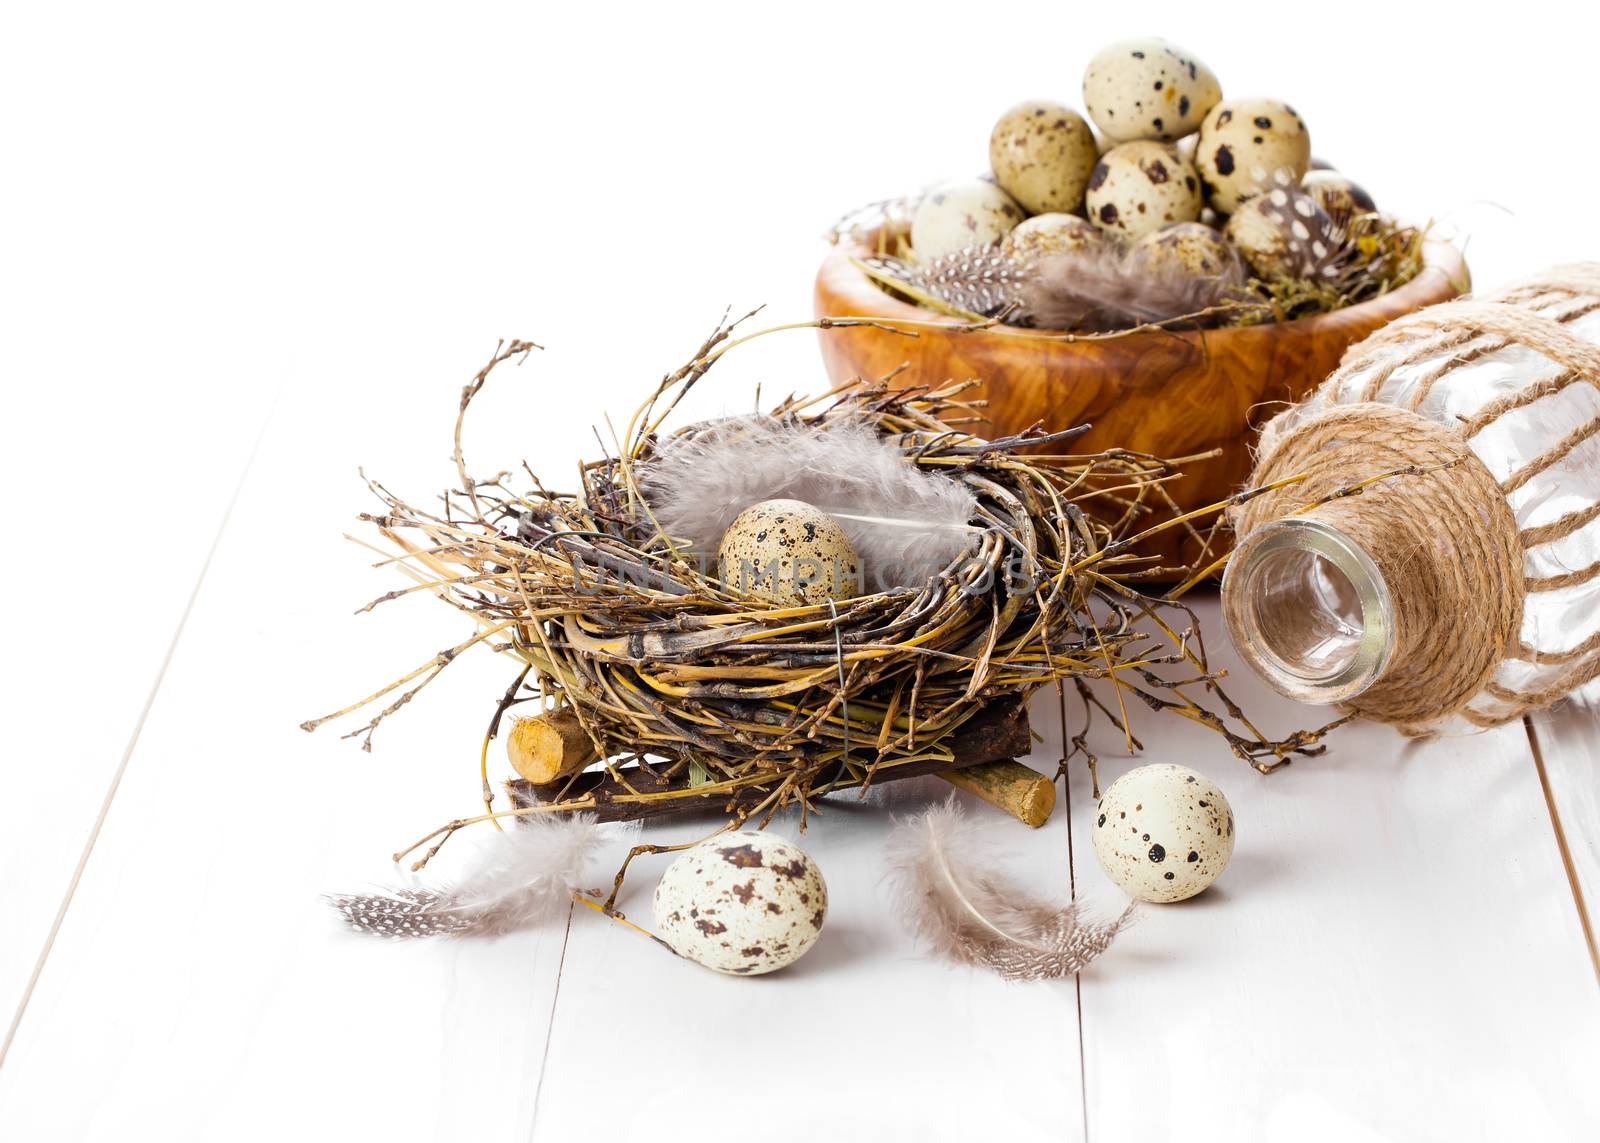 table decoration on white wooden background with quail eggs by motorolka